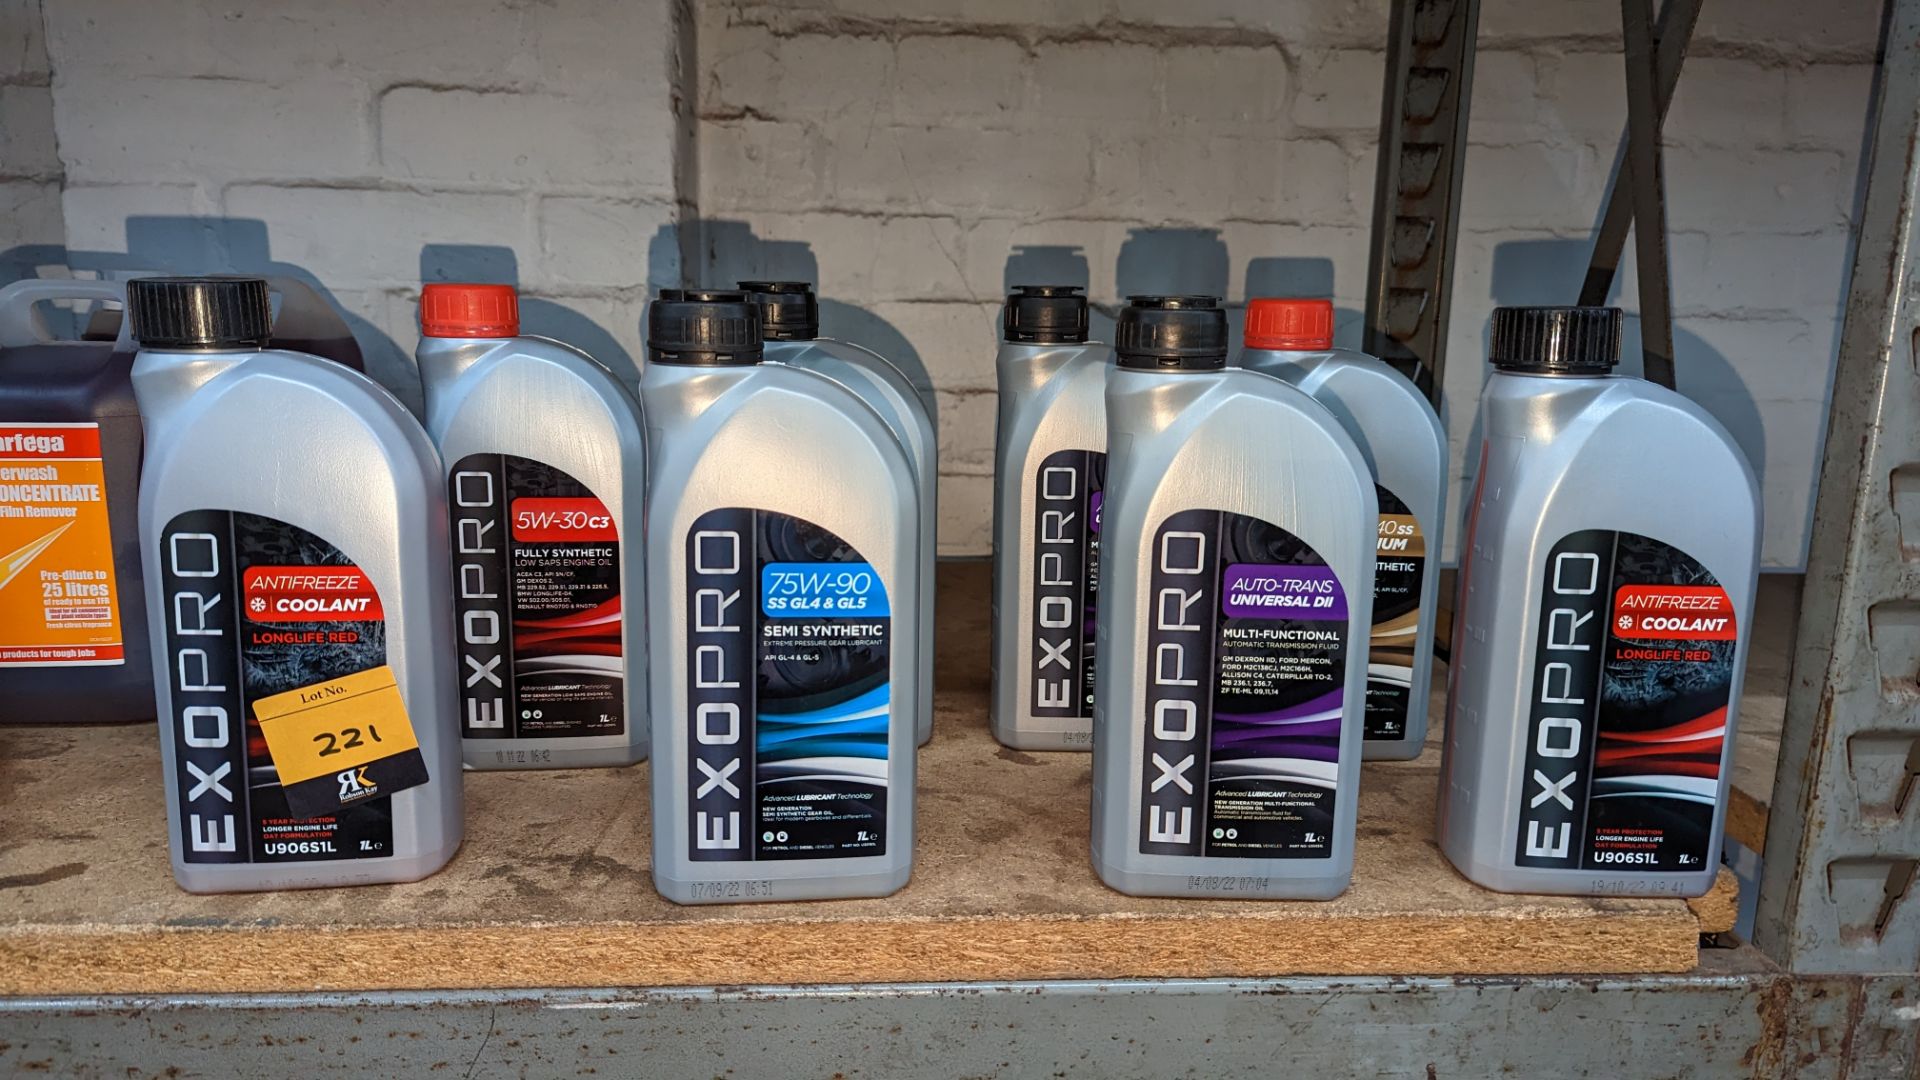 8 assorted 1 litre bottles of Exopro lubricants, oil and other fluids